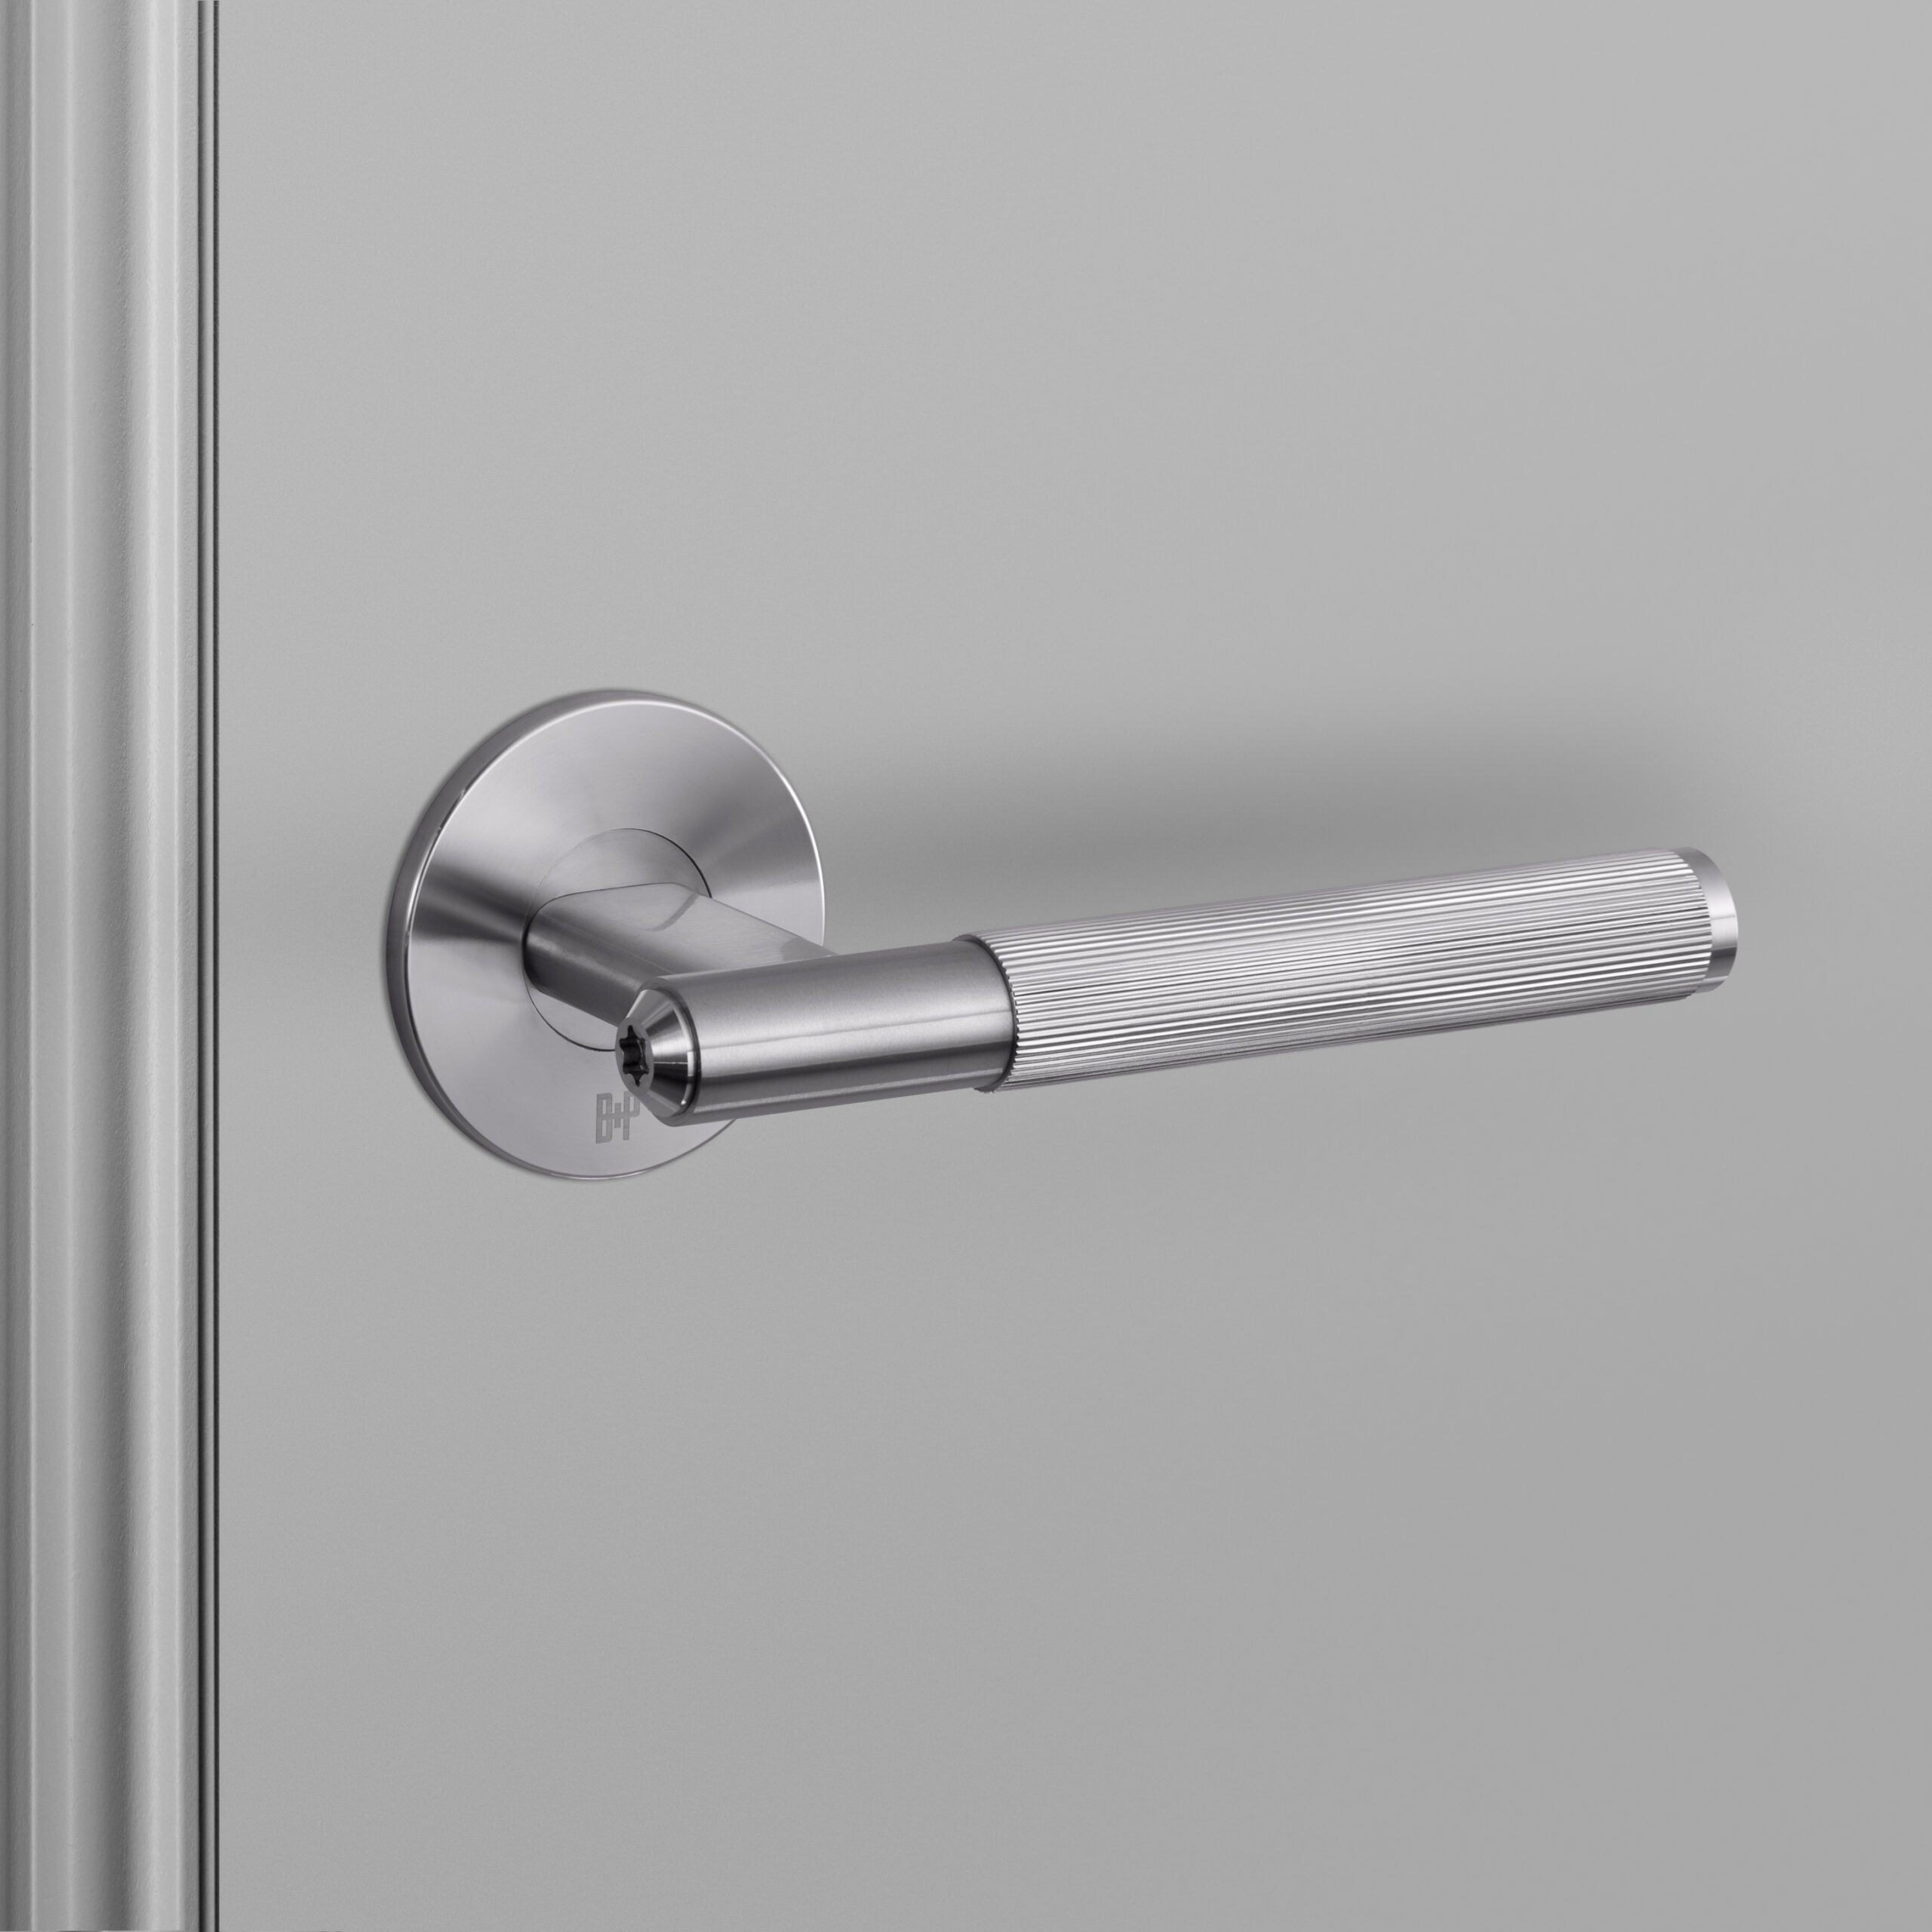 Buster + Punch Conventional Door Handle, Linear Design - FIXED TYPE Hardware Buster + Punch   